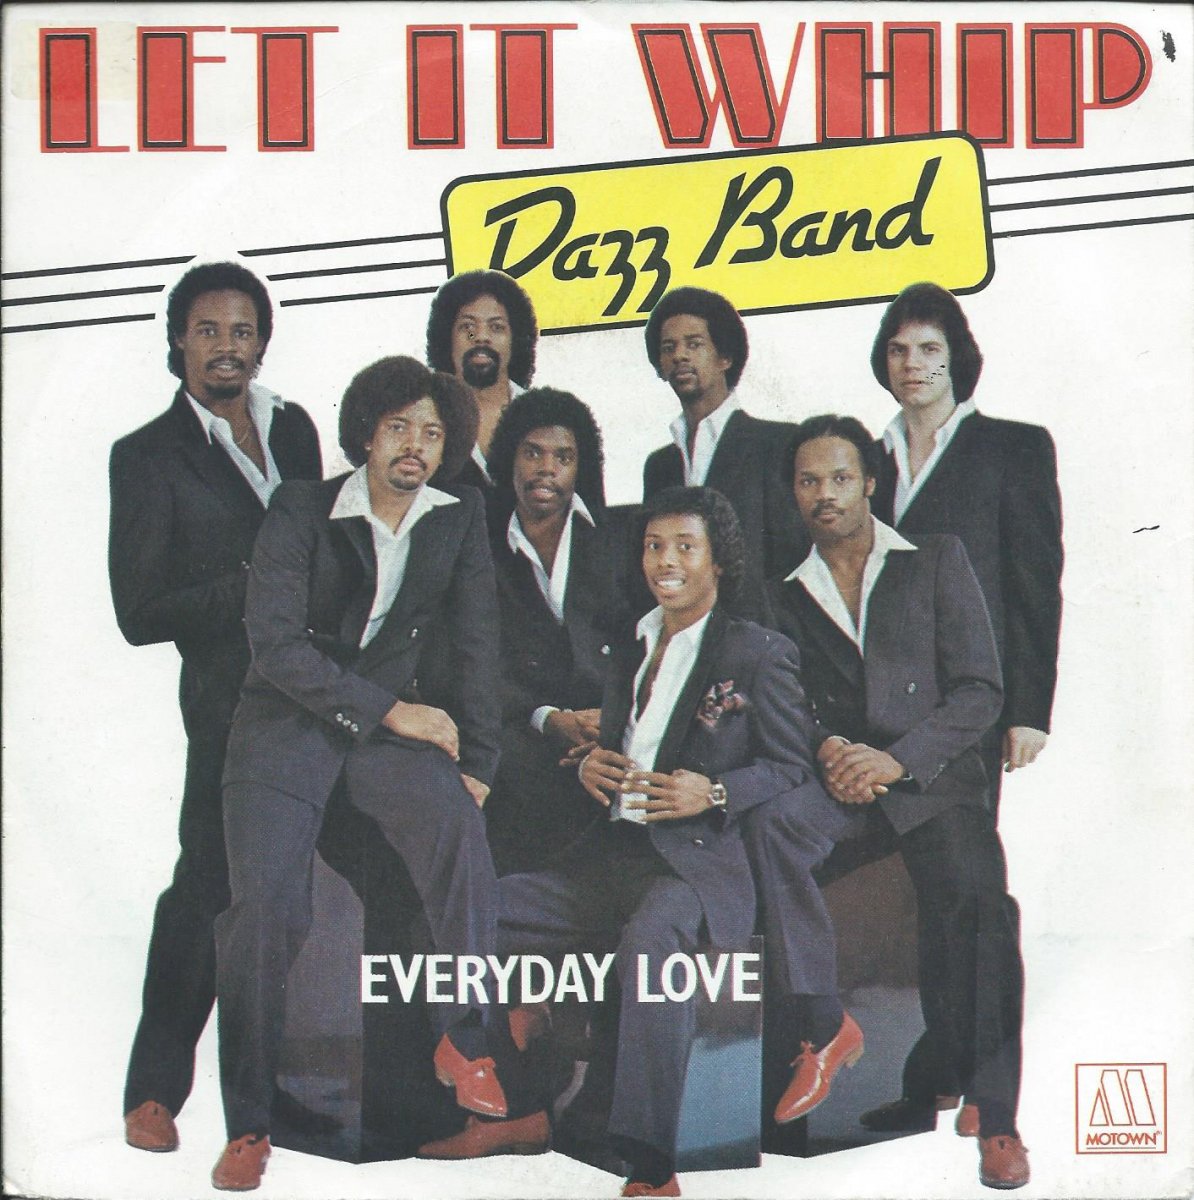 DAZZ BAND / LET IT WHIP / EVERYDAY LOVE (7